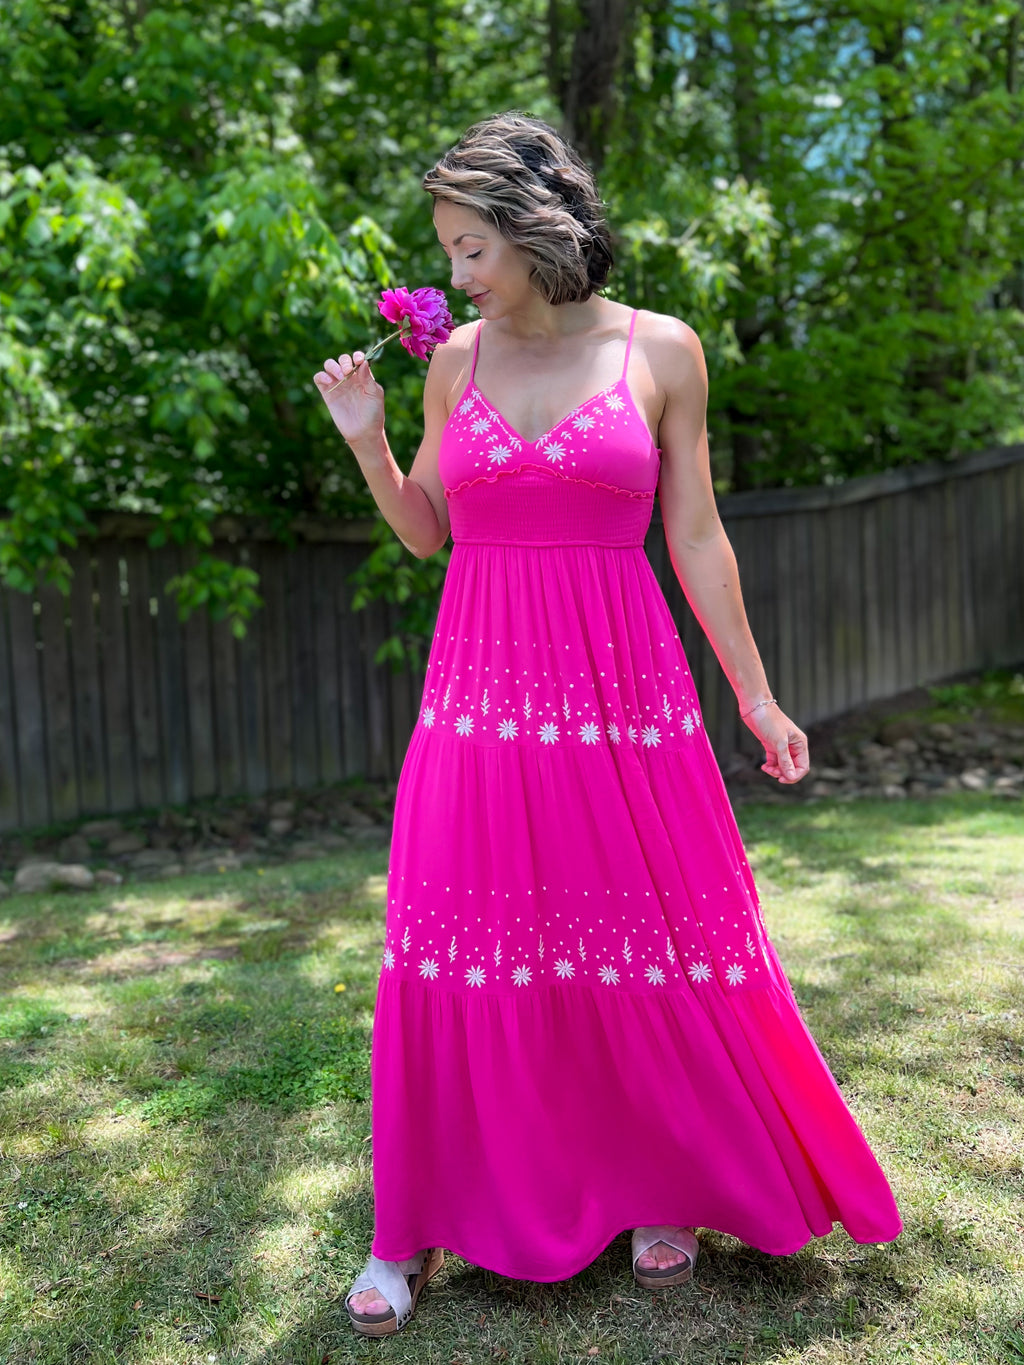 Embroidered Dream Dress (Pink)